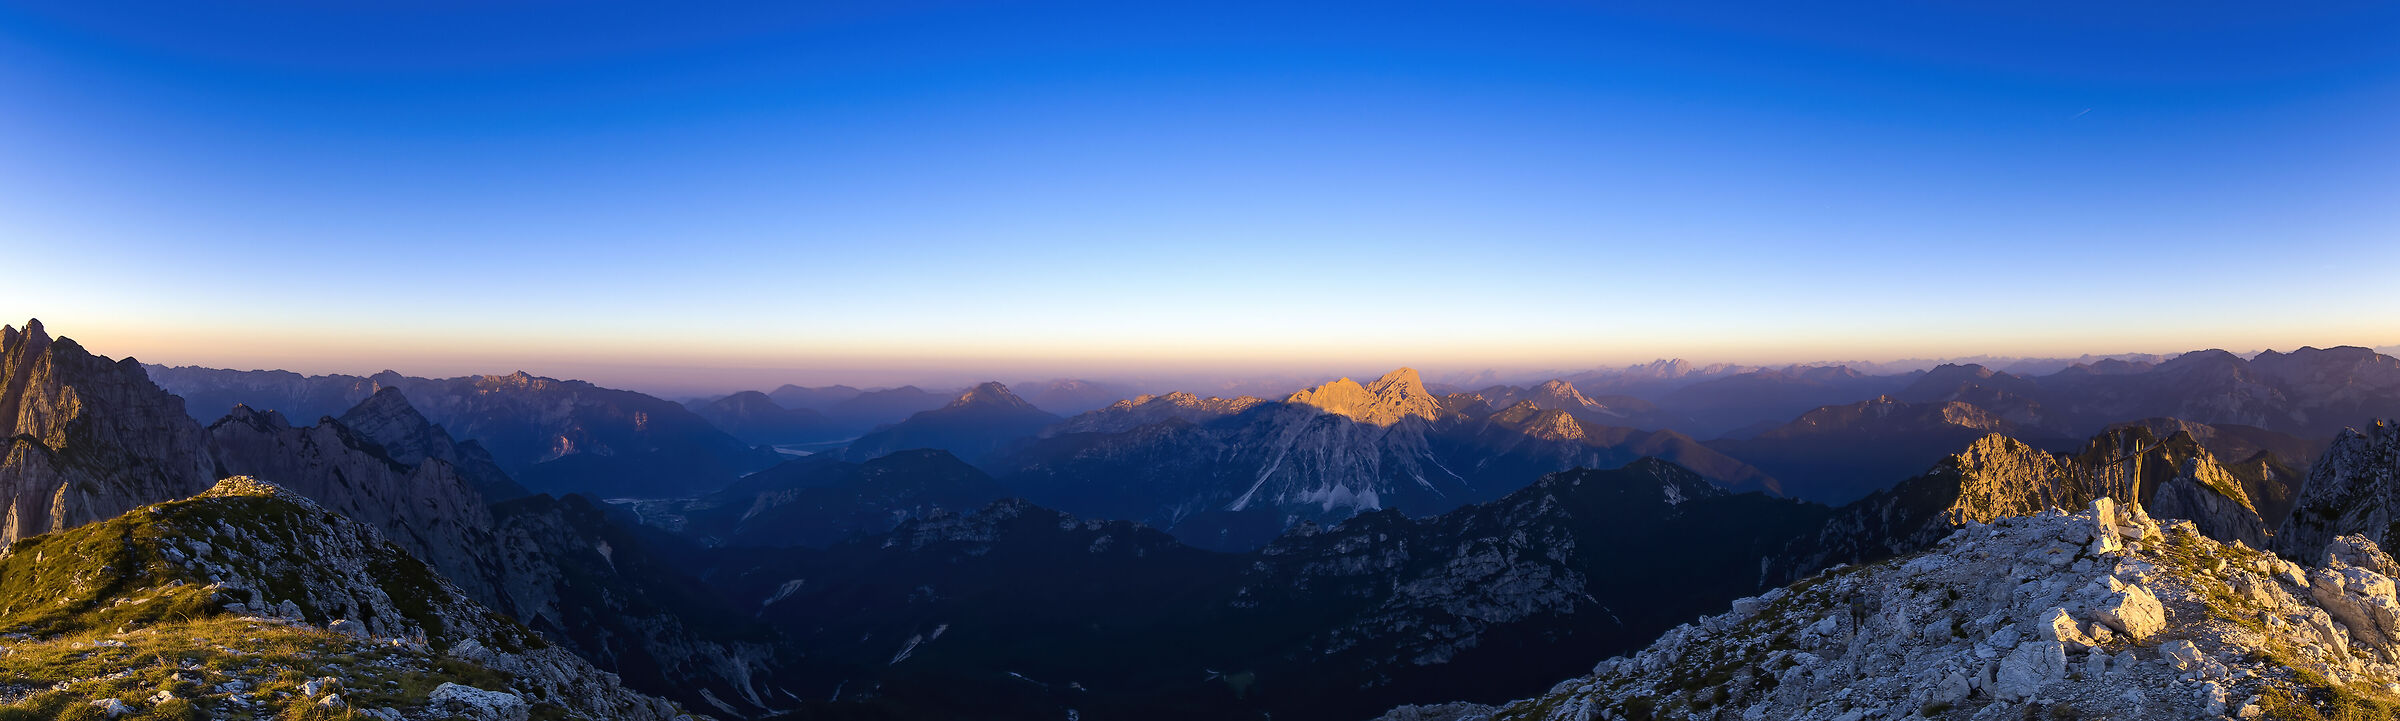 Sunrise overview of the Carnic Alps...